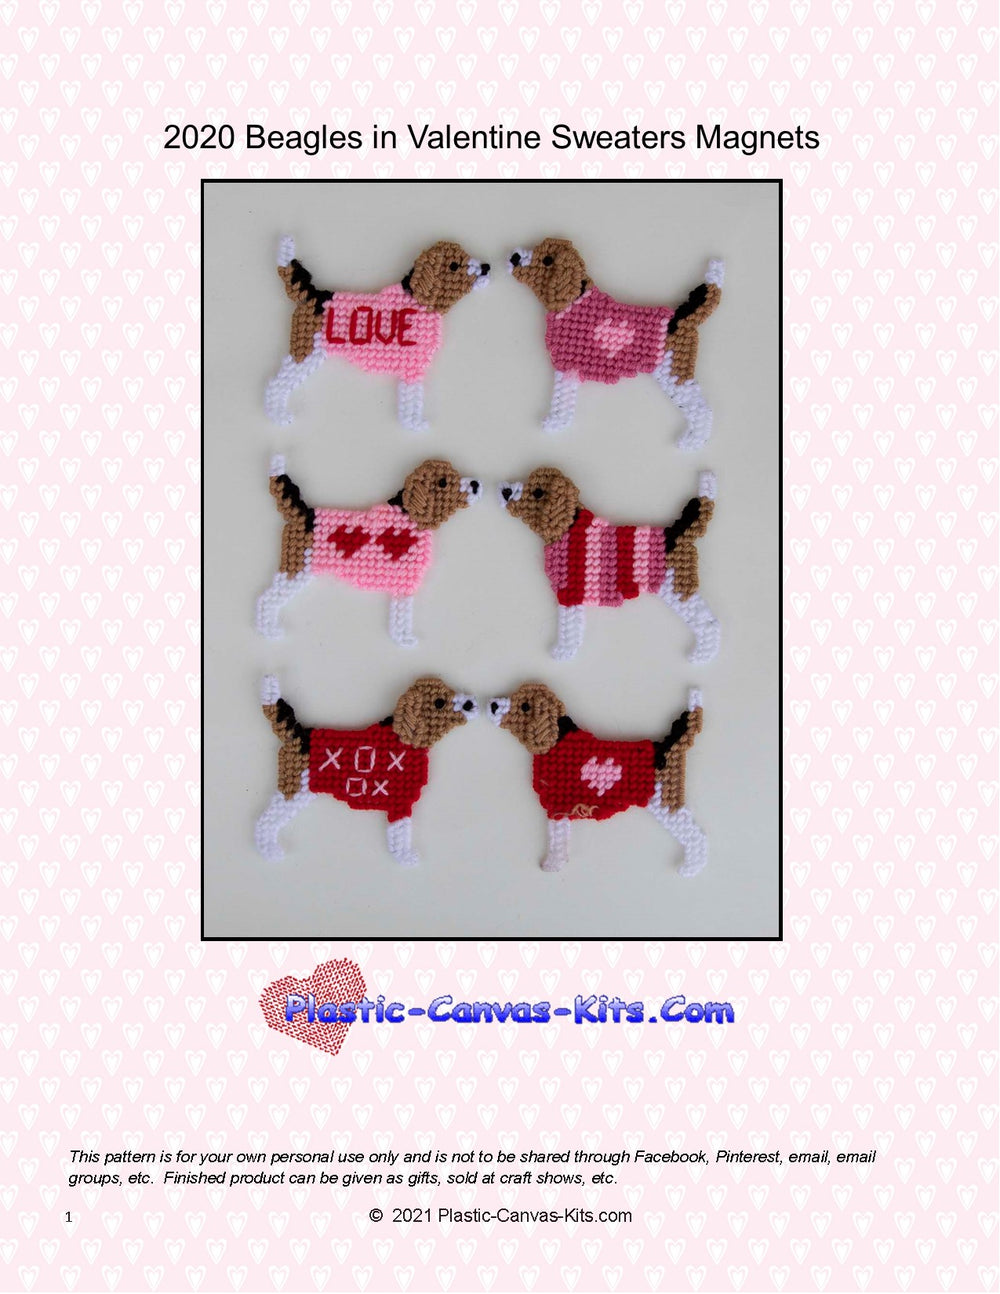 Beagles in Valentine's Day Sweaters Magnets